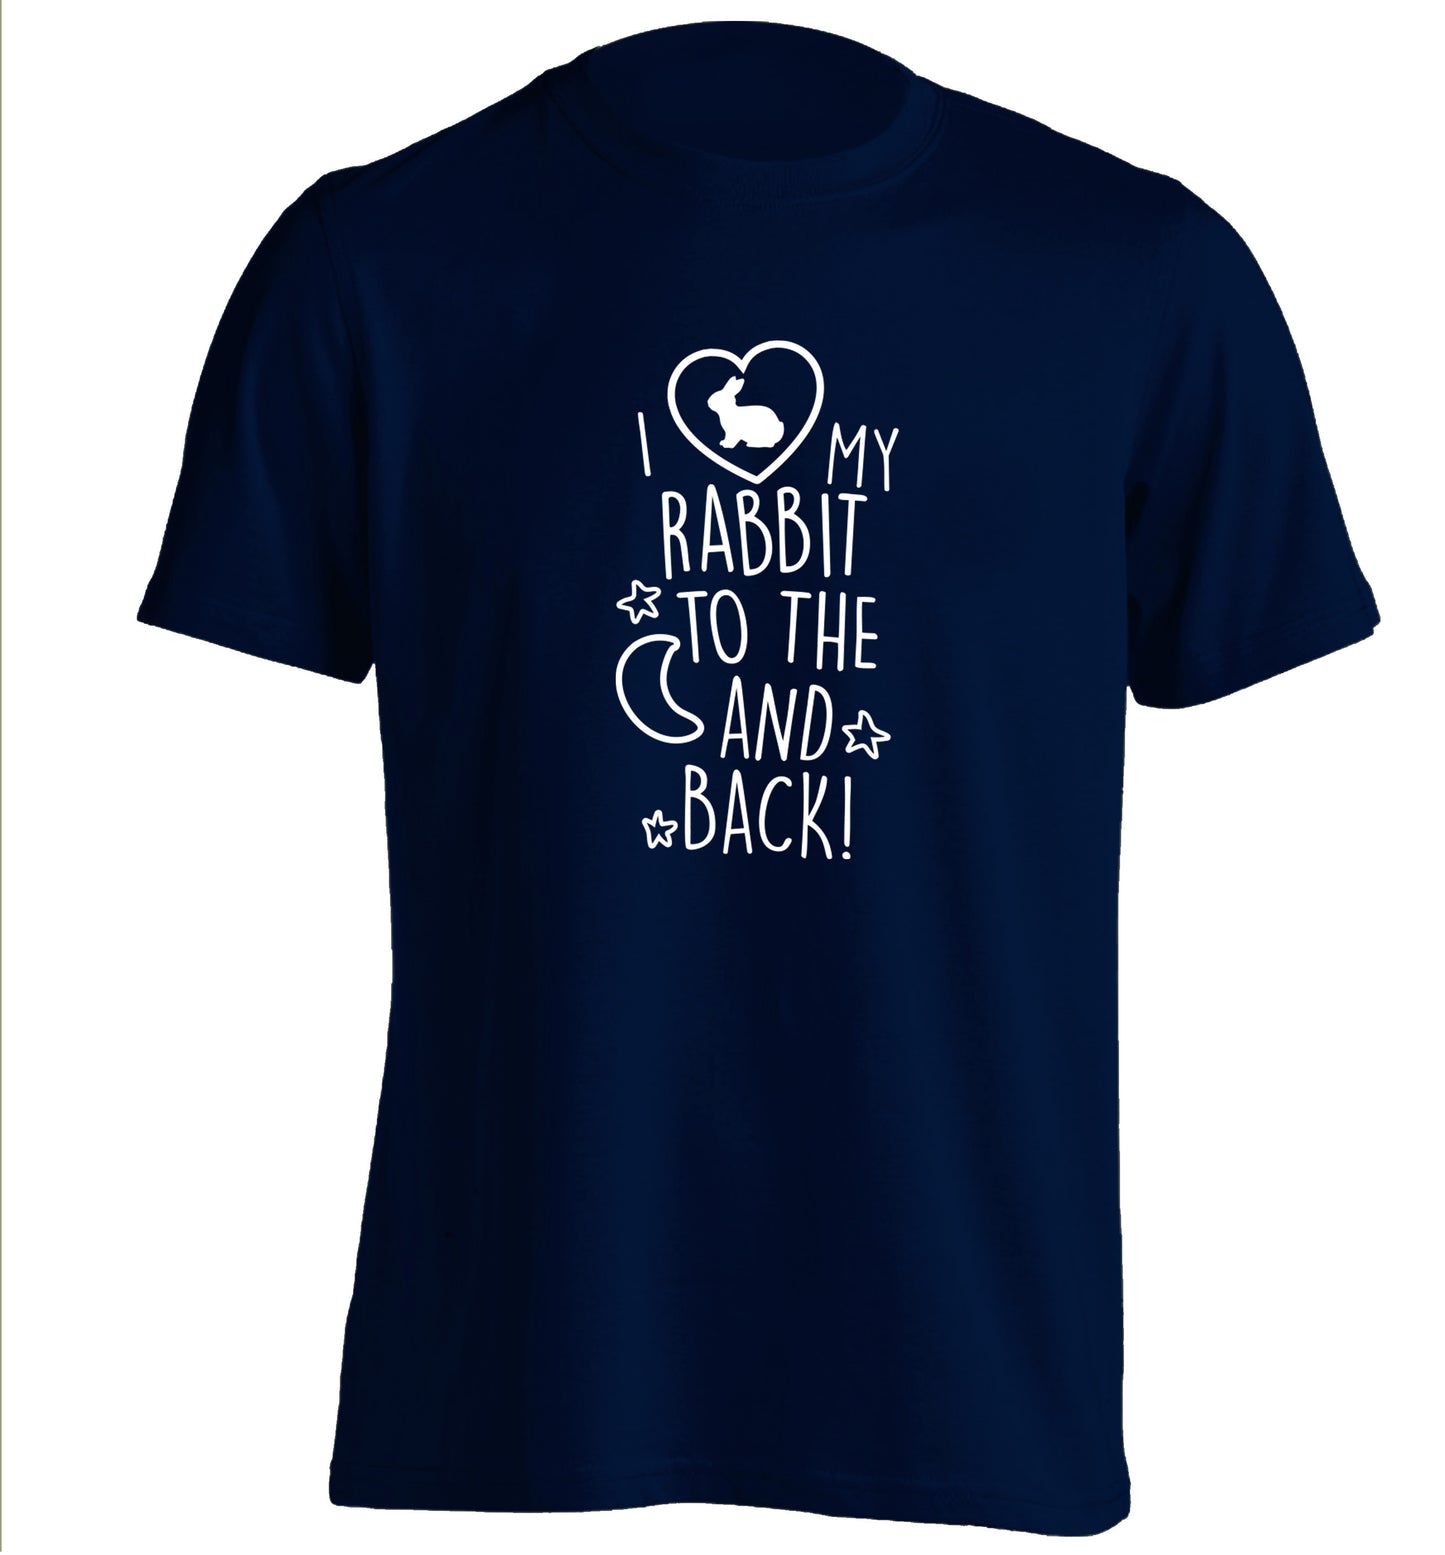 I love my rabbit to the moon and back adults unisex navy Tshirt 2XL